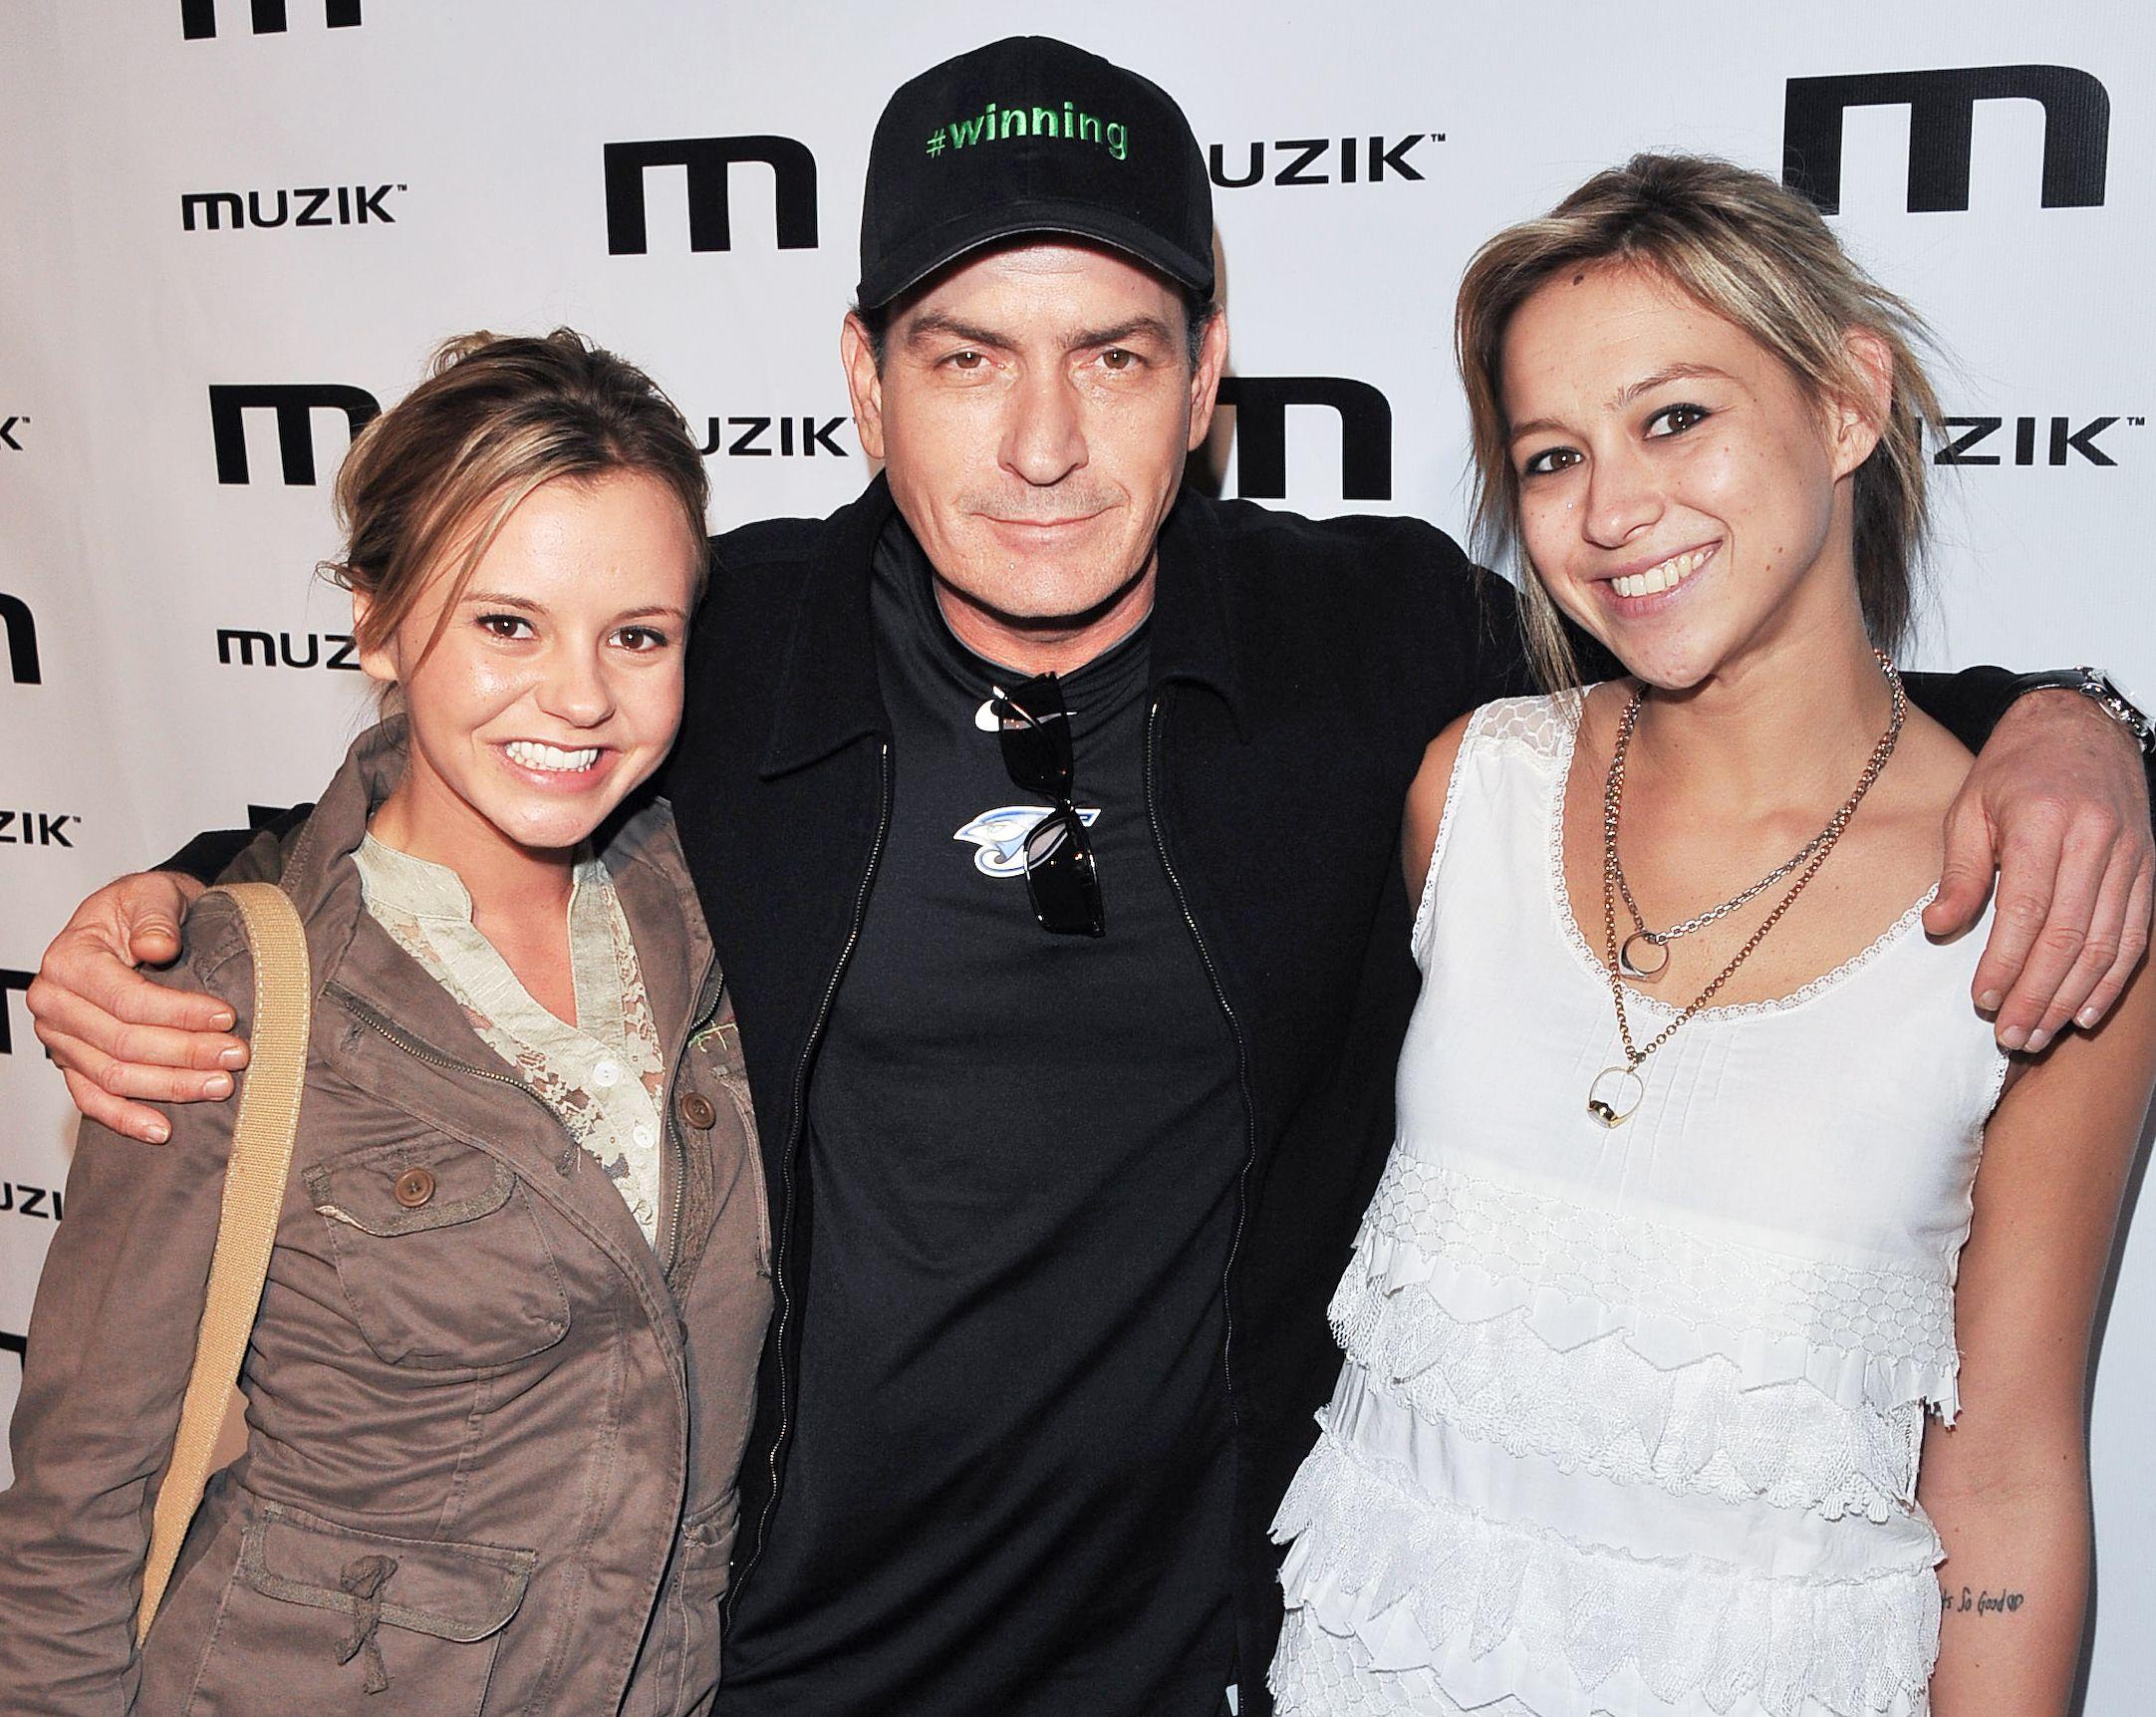 Bree Olson to Charlie Sheen After HIV Reveal: I Will Never Forgive You